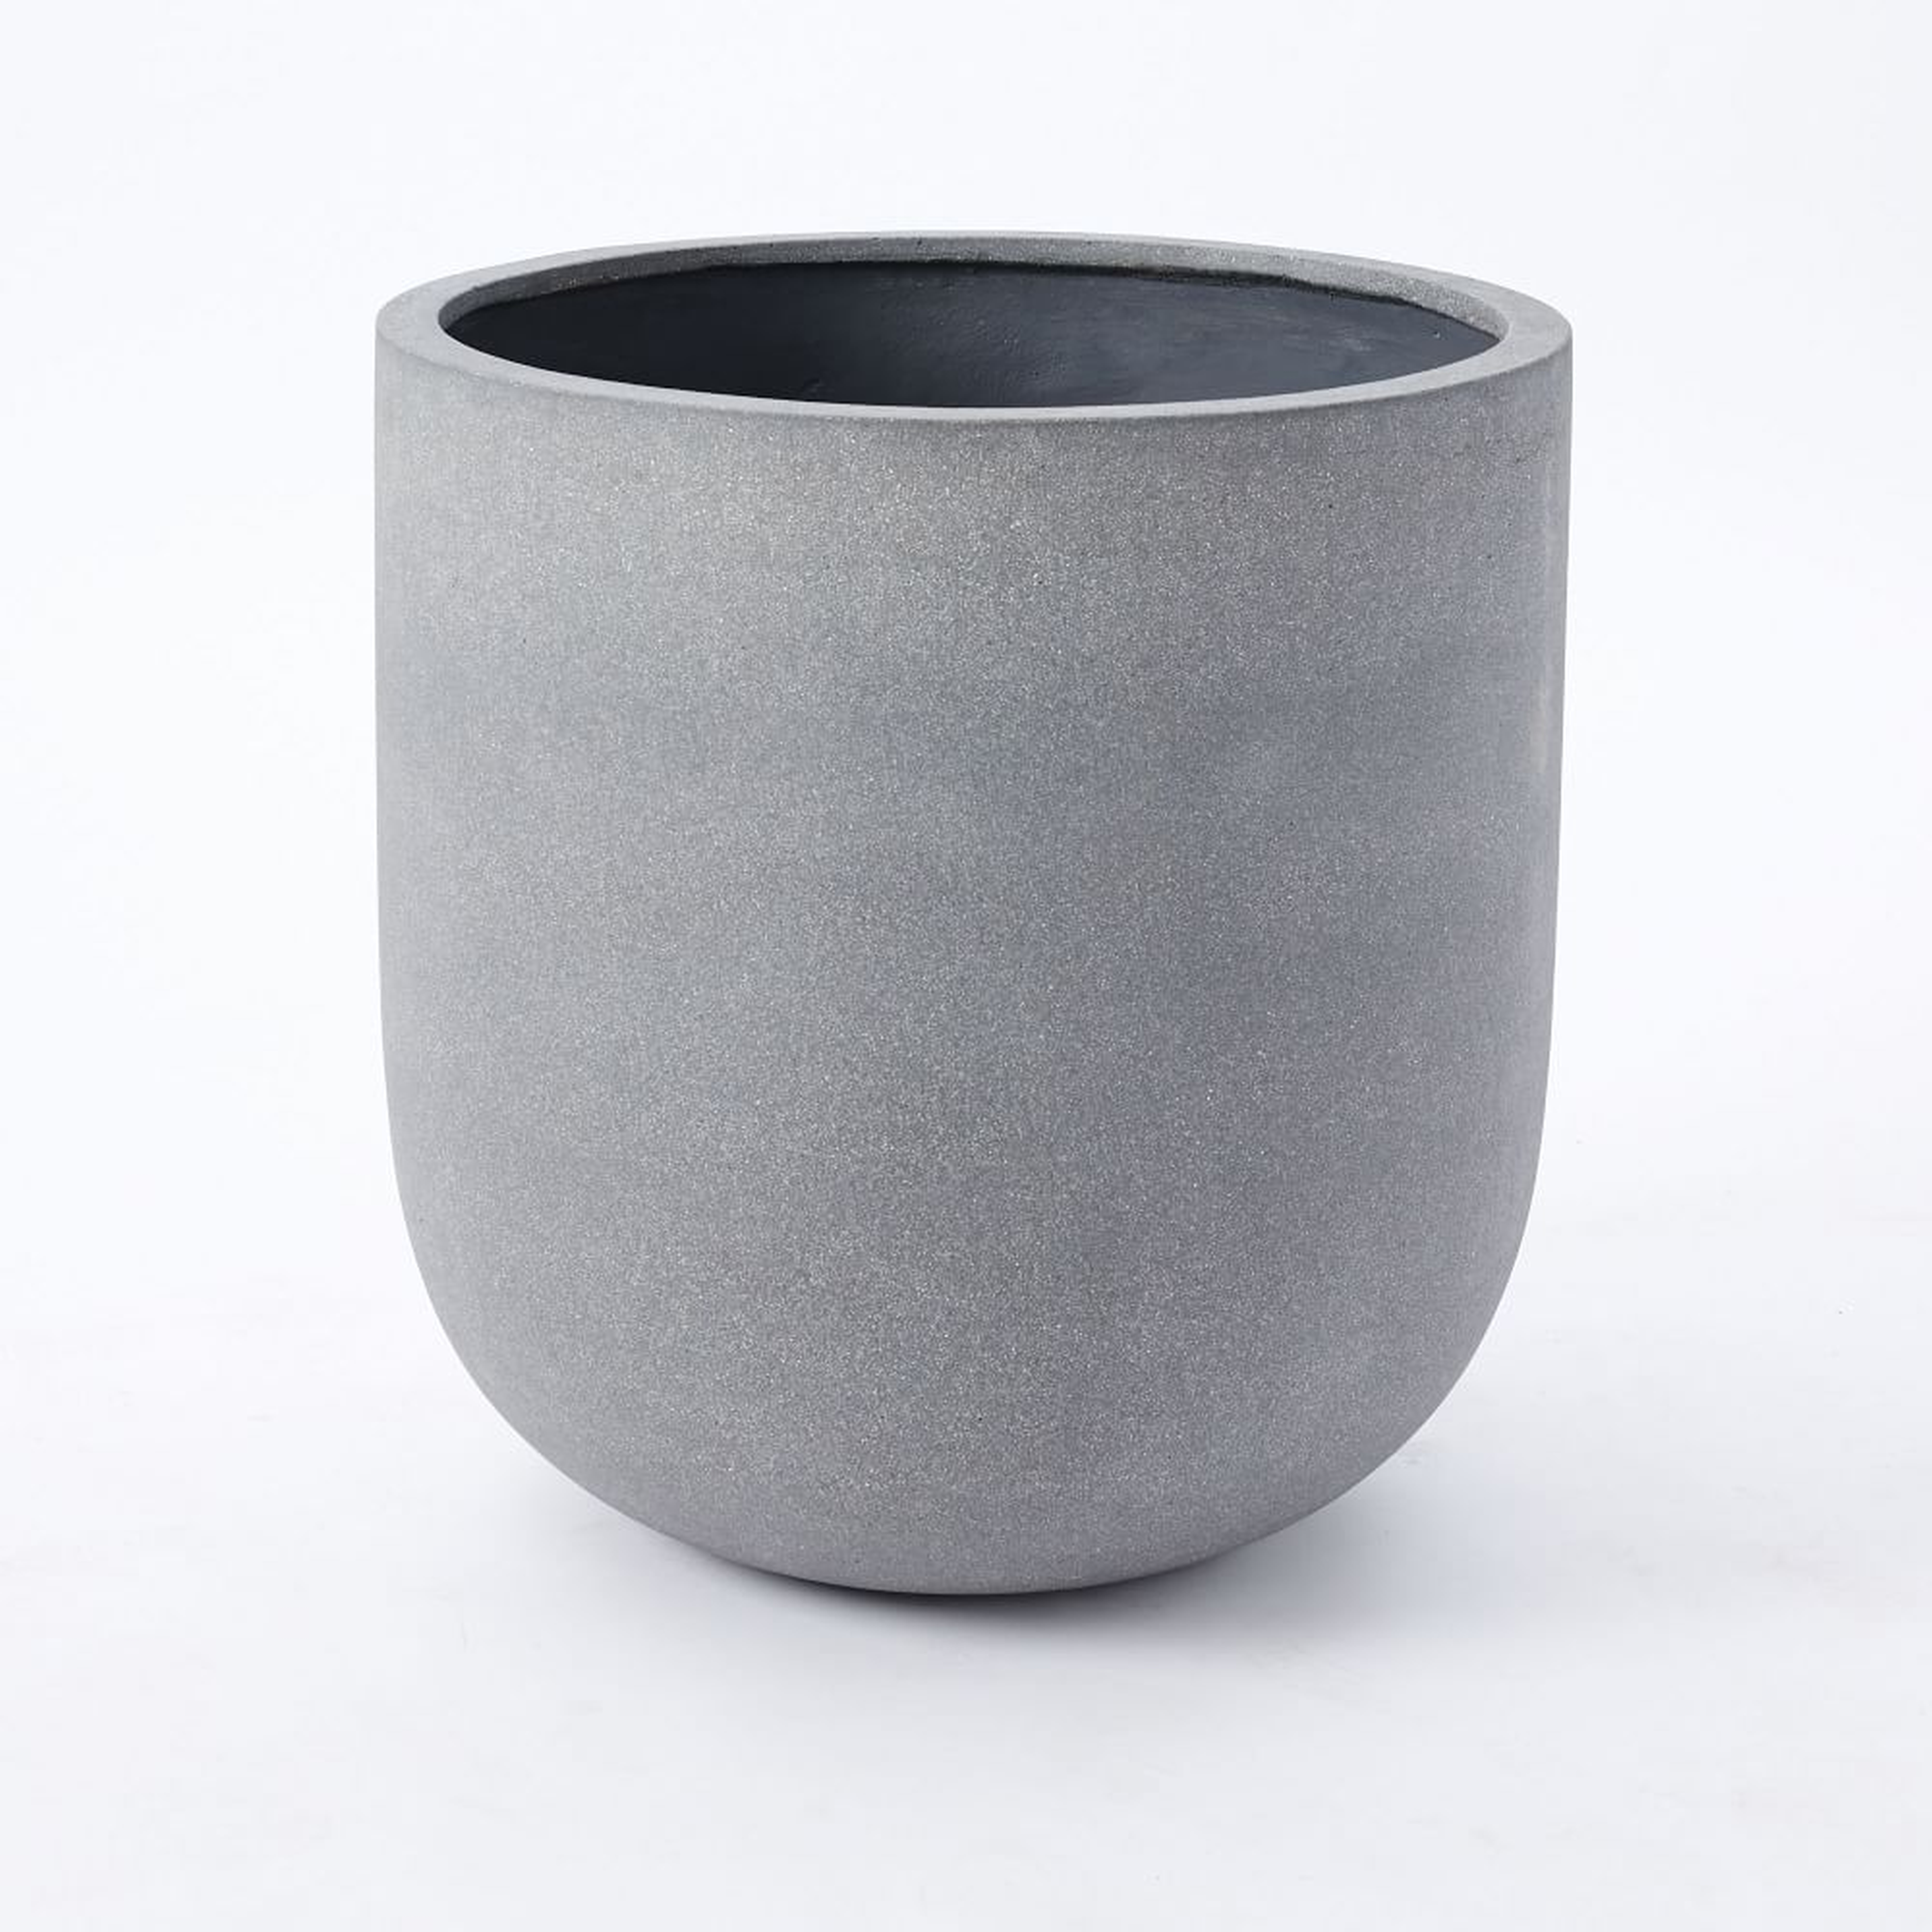 Radius Ficonstone Indoor/Outdoor Planter, Extra Large, 25.6"D x 26.8"H, Storm Gray - West Elm